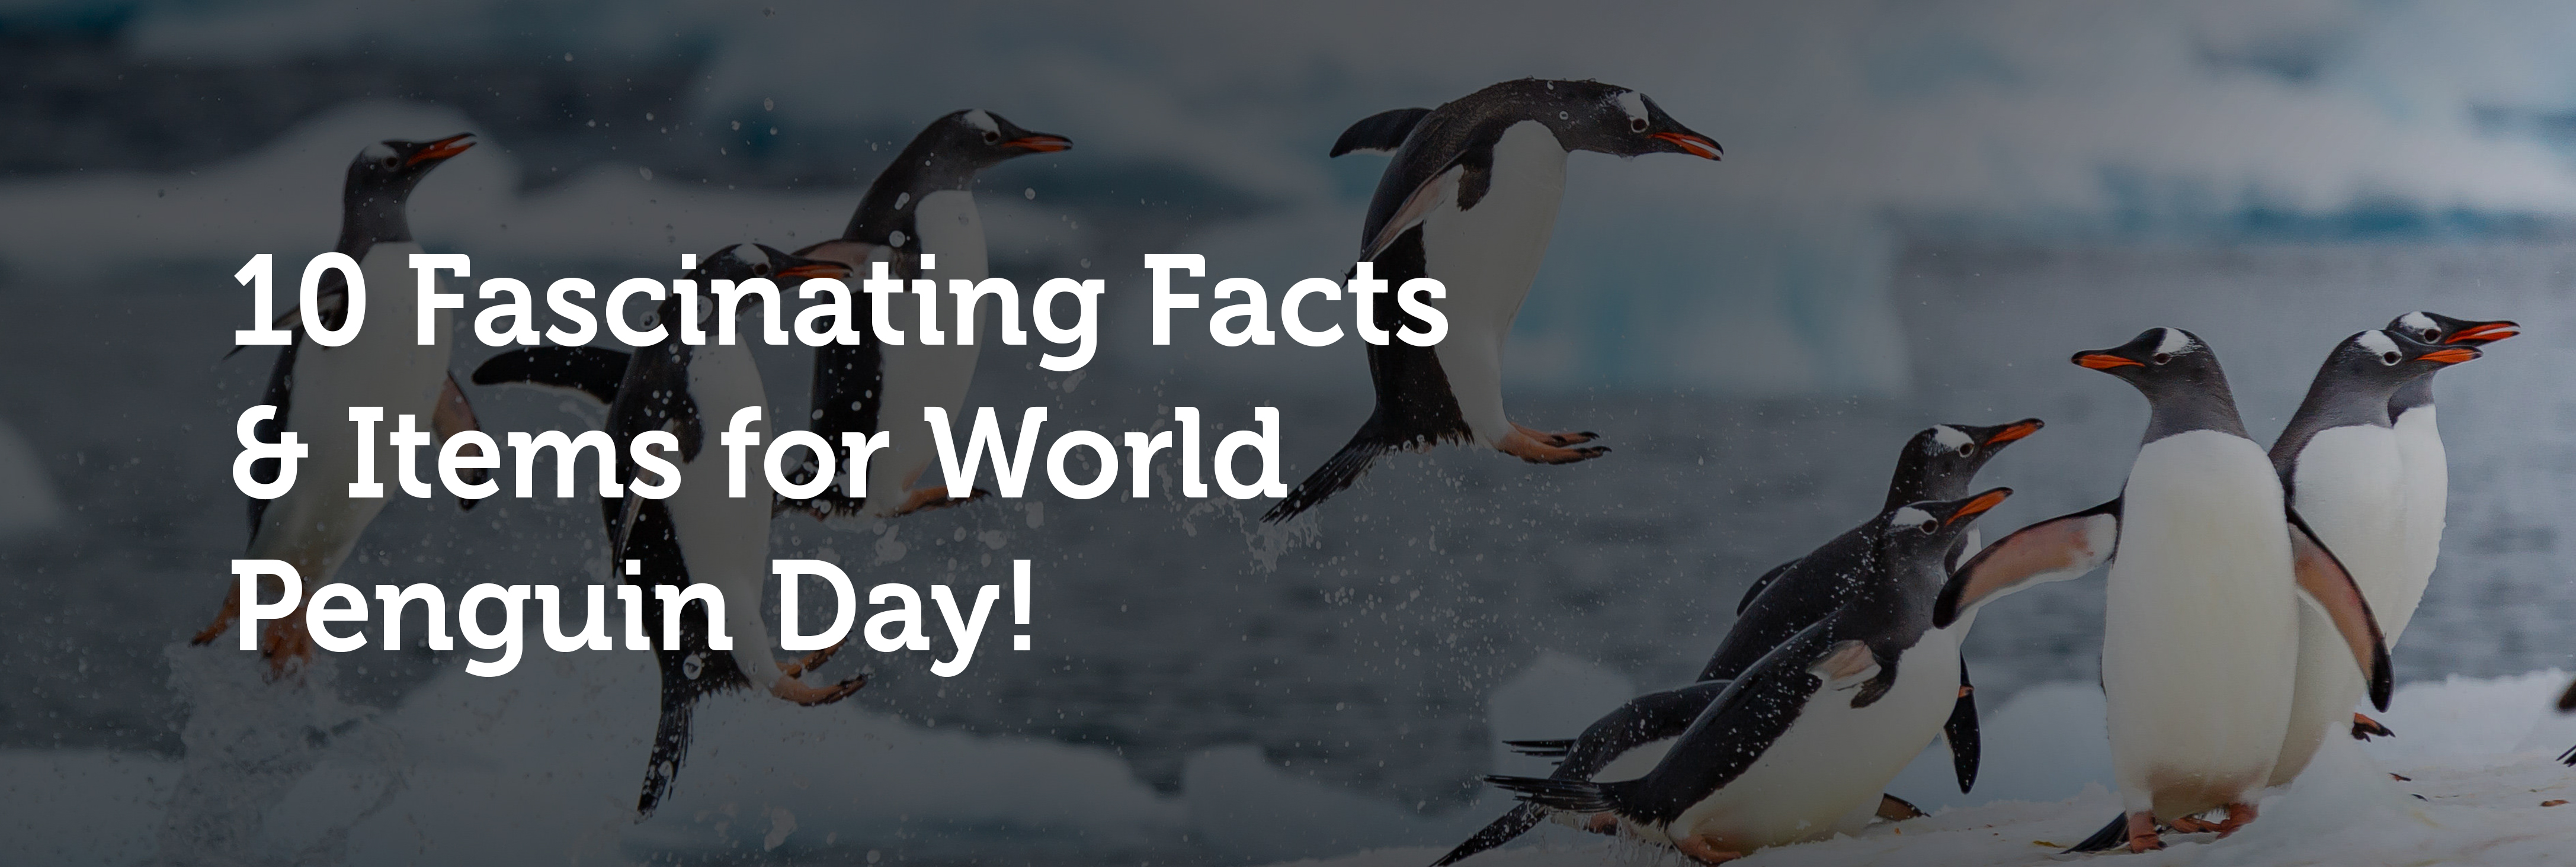 Fascinating Facts Items World Penguin Day